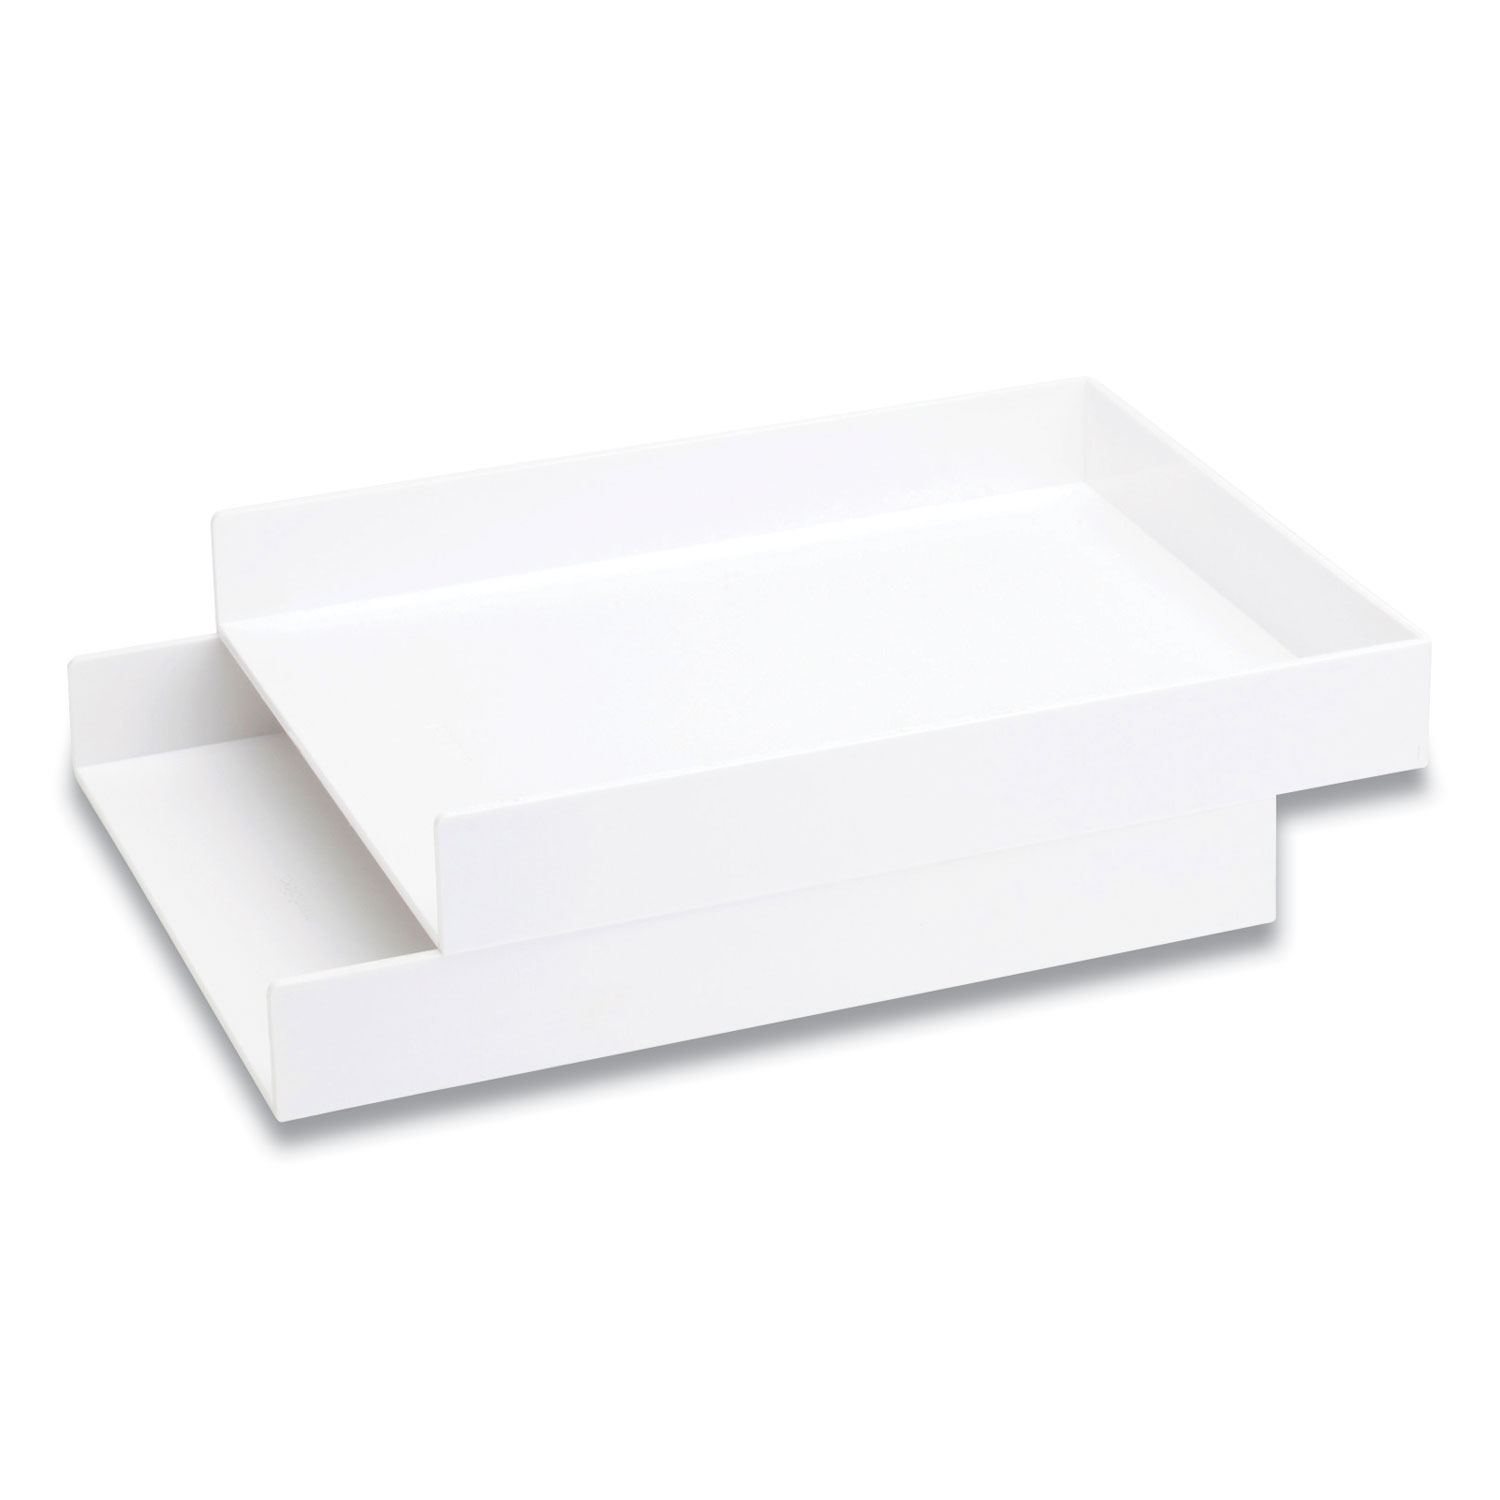  Poppin 100212 Stackable Letter Trays, 1 Section, Letter Size Files, 9.75 x 12.5 x 1.75, White, 2/Pack (PPJ49056) 